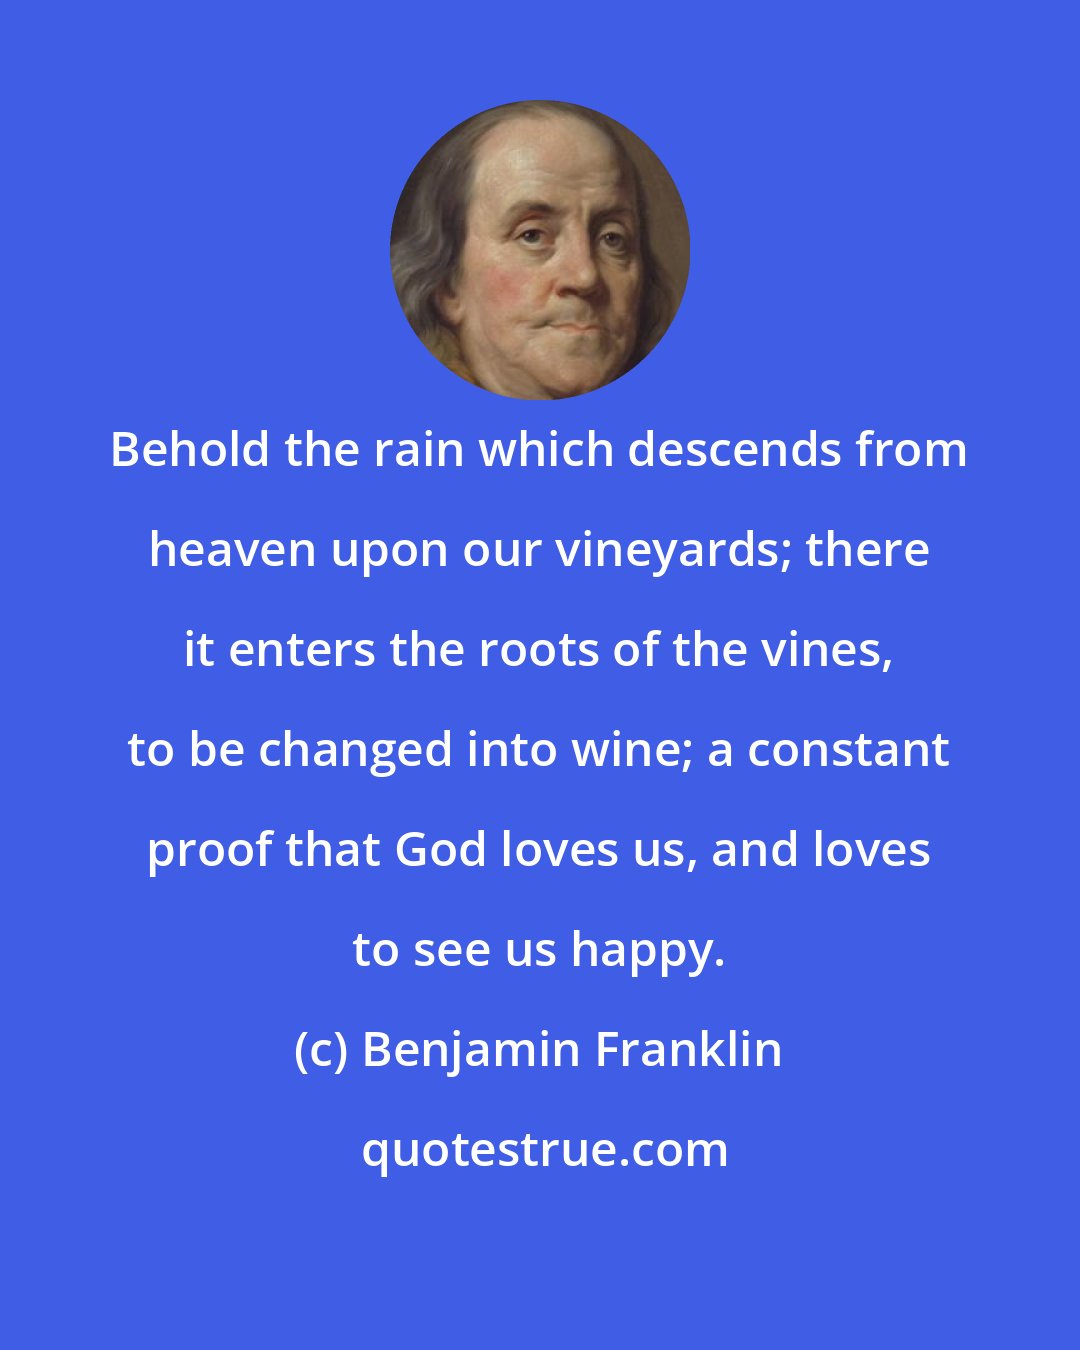 Benjamin Franklin: Behold the rain which descends from heaven upon our vineyards; there it enters the roots of the vines, to be changed into wine; a constant proof that God loves us, and loves to see us happy.